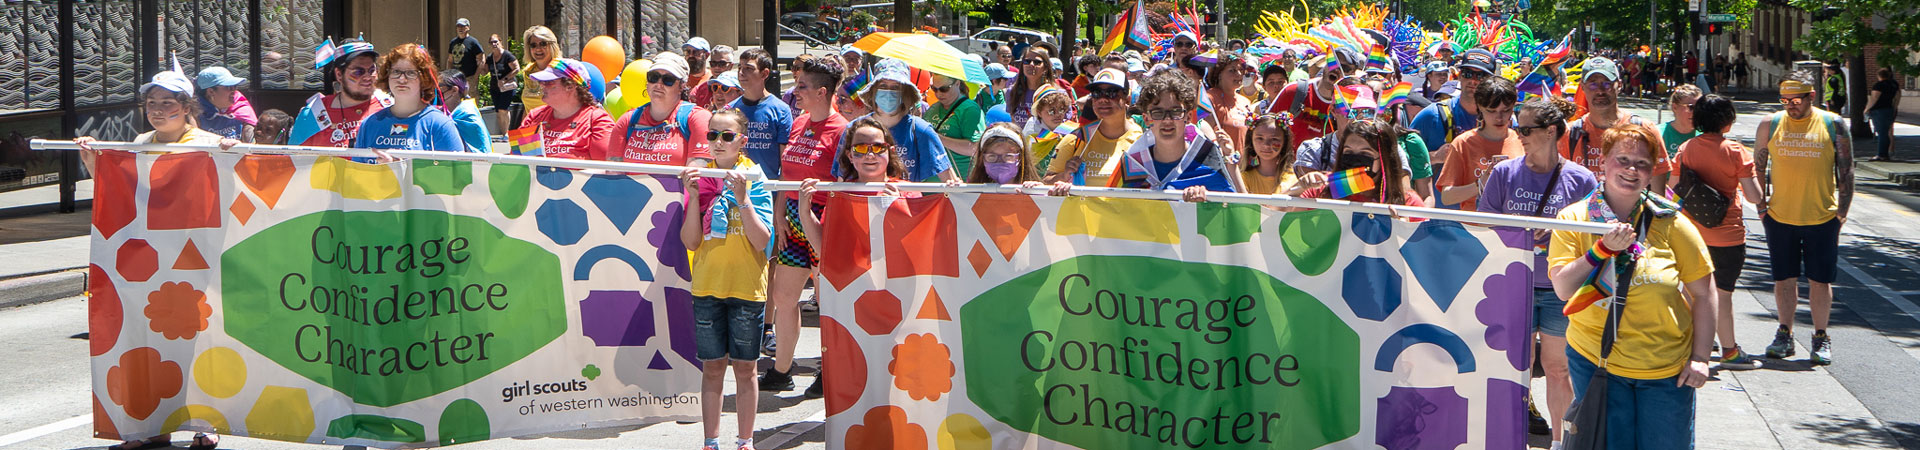  Girl Scout staff, youth, and adult members march in the Seattle Pride parade. It is sunny, and they are wearing colorful clothing and waving rainbow flag. The people at the front are holding a large, rainbow-colored banner that reads, "Courage, Confidence, Character." 